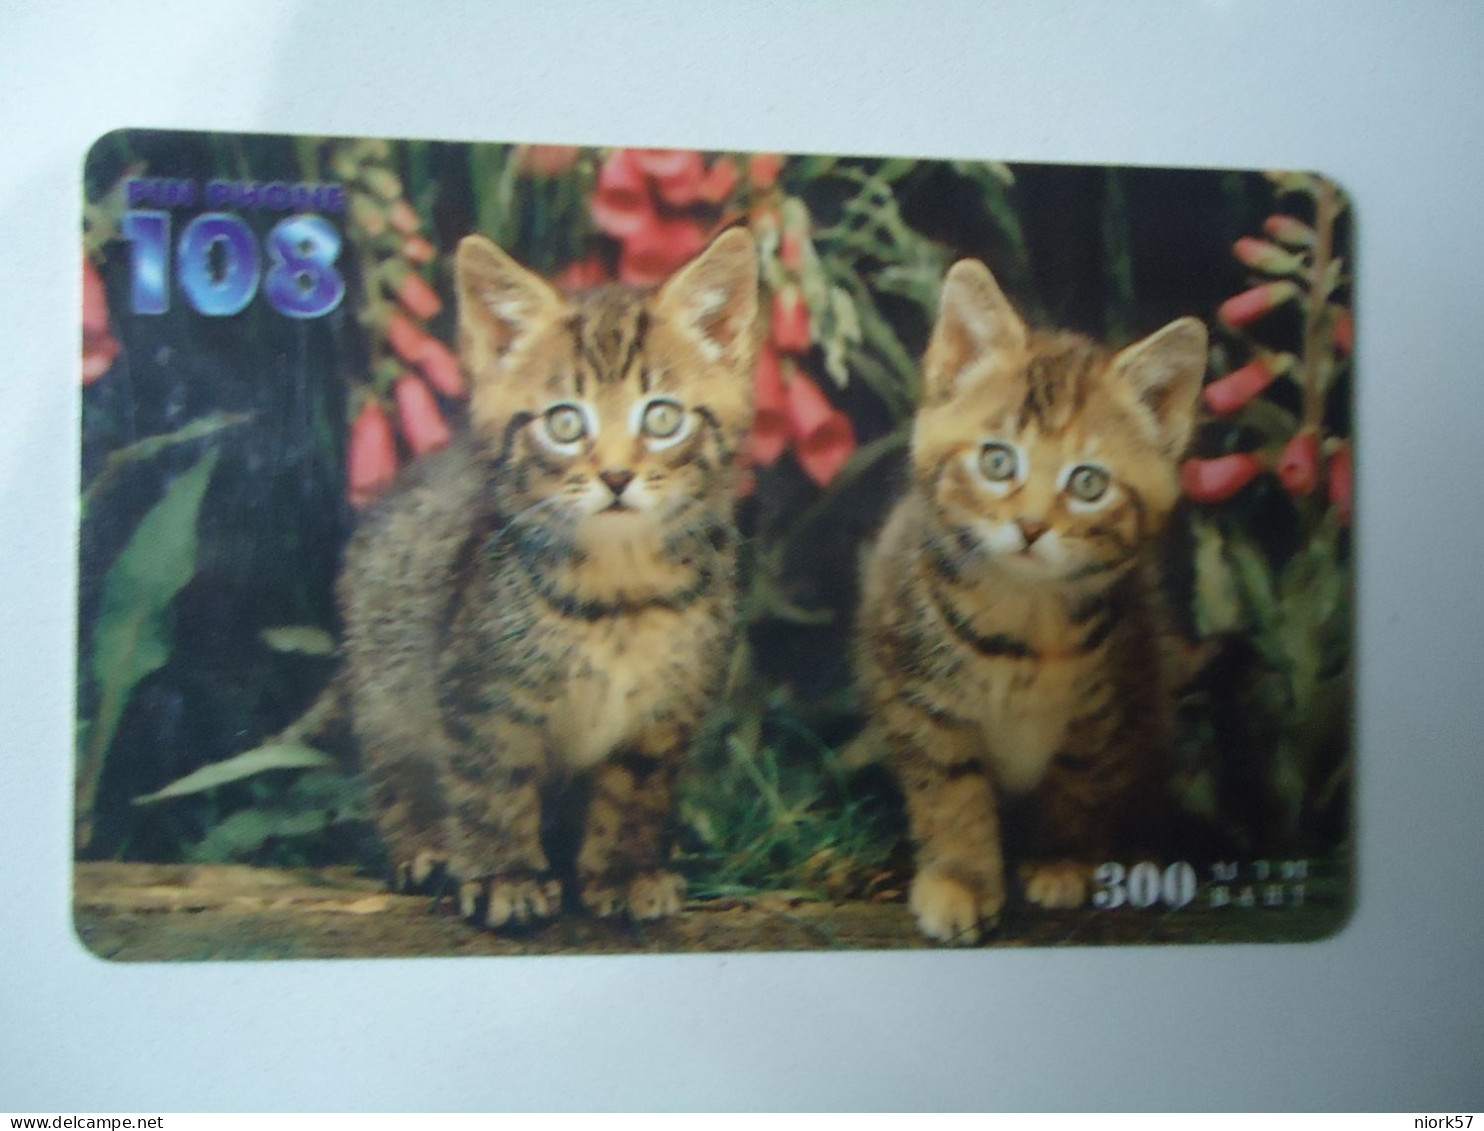 THAILAND USED  CARDS PIN 108 FLOWERS TREE  CATS UNITS 300 - Chats